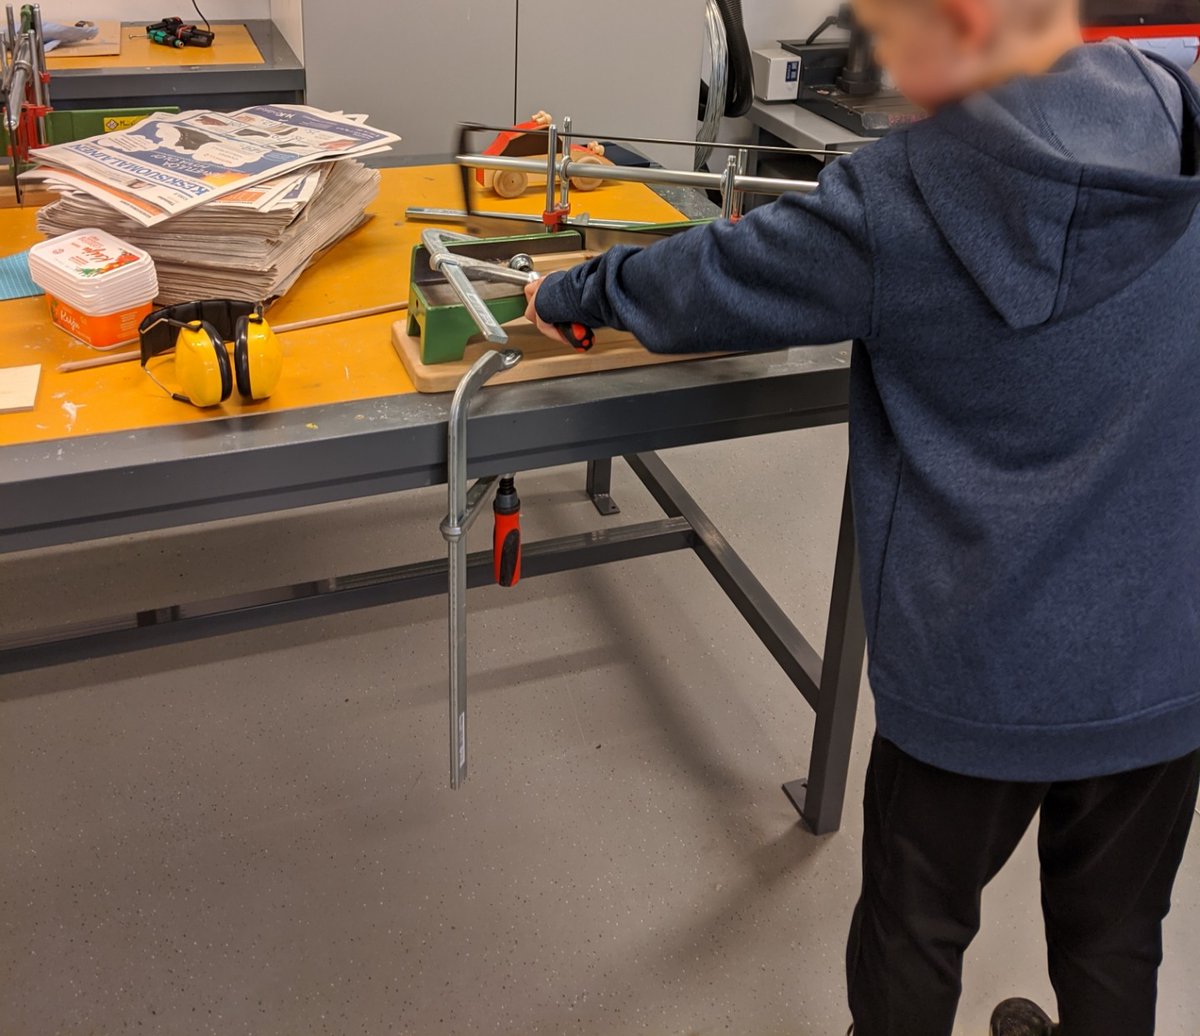 Only in #Finland do 4th graders use chainsaws and other wood cutting machines that I don't even know the name of. Incredible! #FleetES #fulbrightfinland